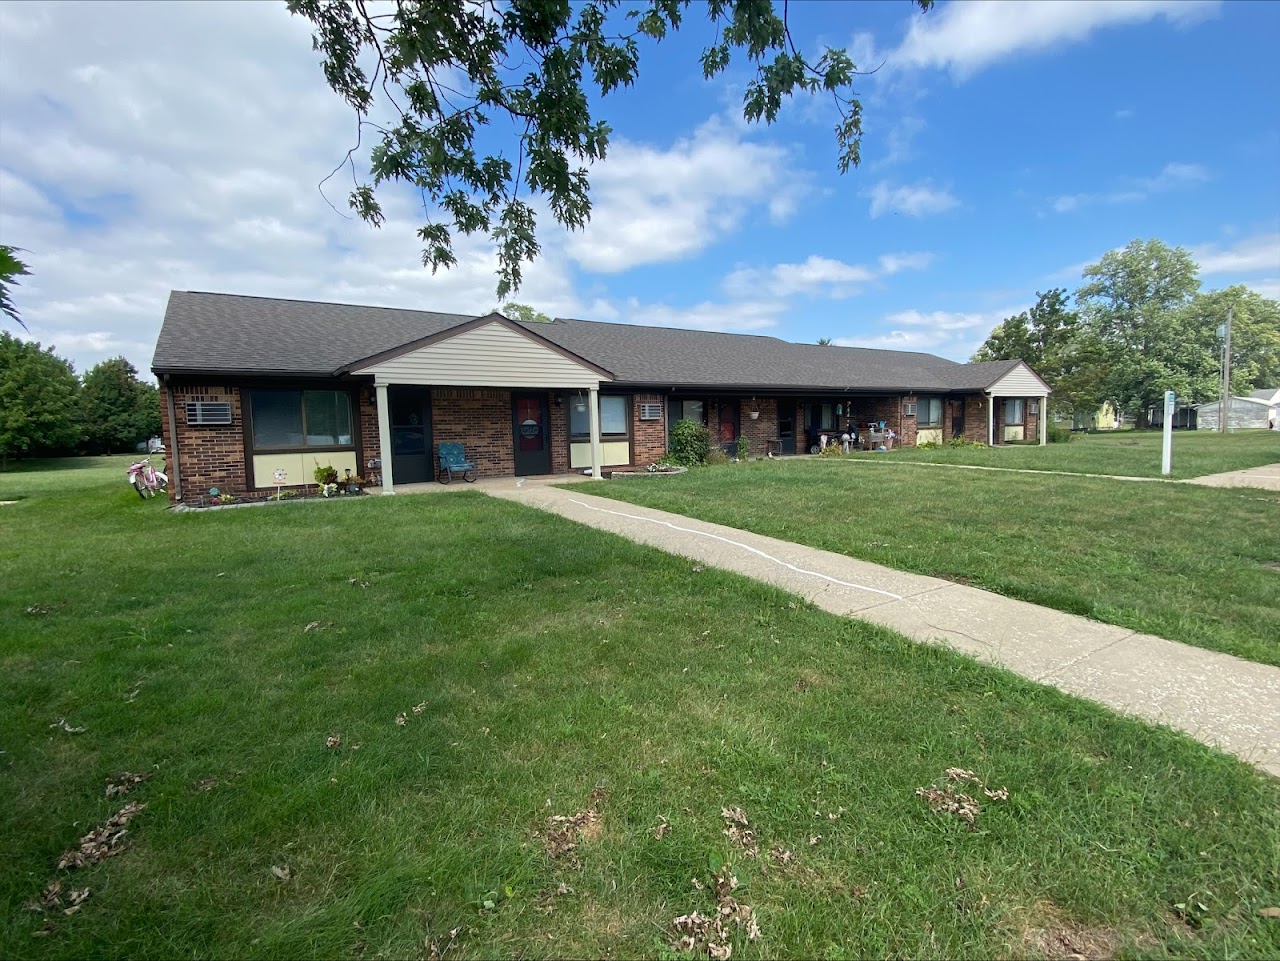 Photo of COUNTRY PLACE APTS (ARGENTA). Affordable housing located at 244 W PRAIRIE ST ARGENTA, IL 62501